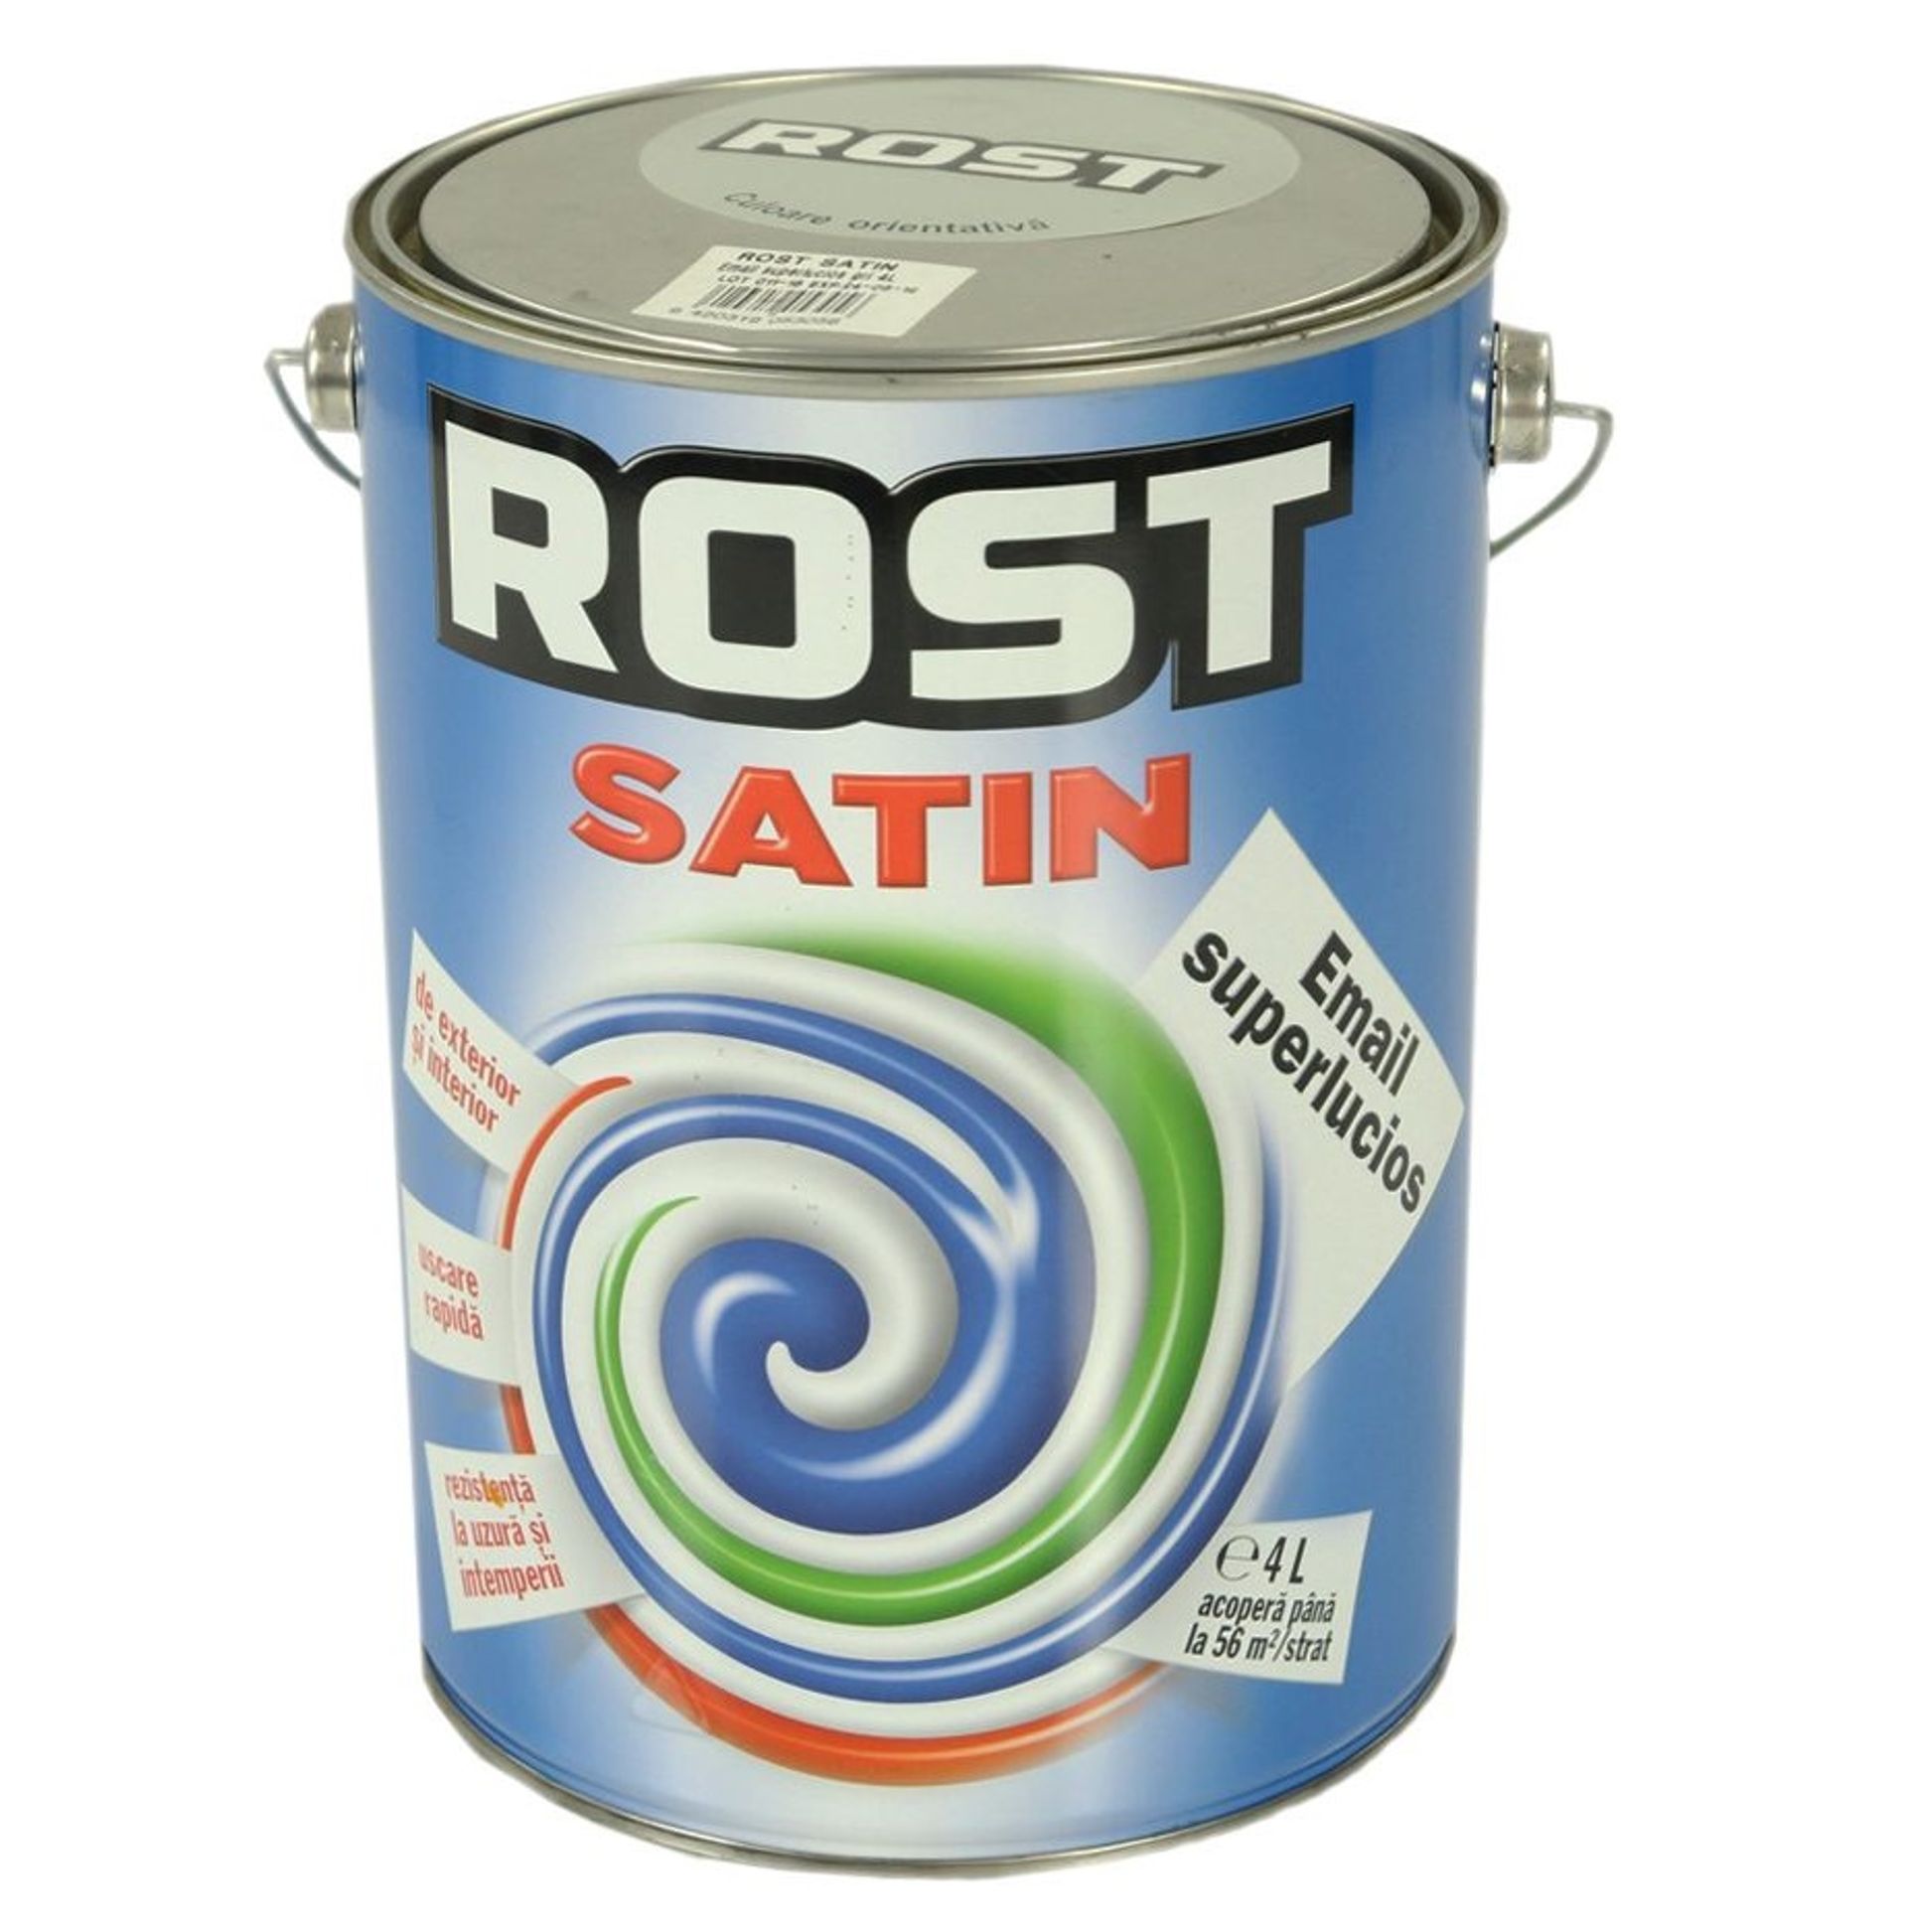 Paints - White Superglossy Paint for Wood/Metal Rost Satin 4L, https:maxbau.ro